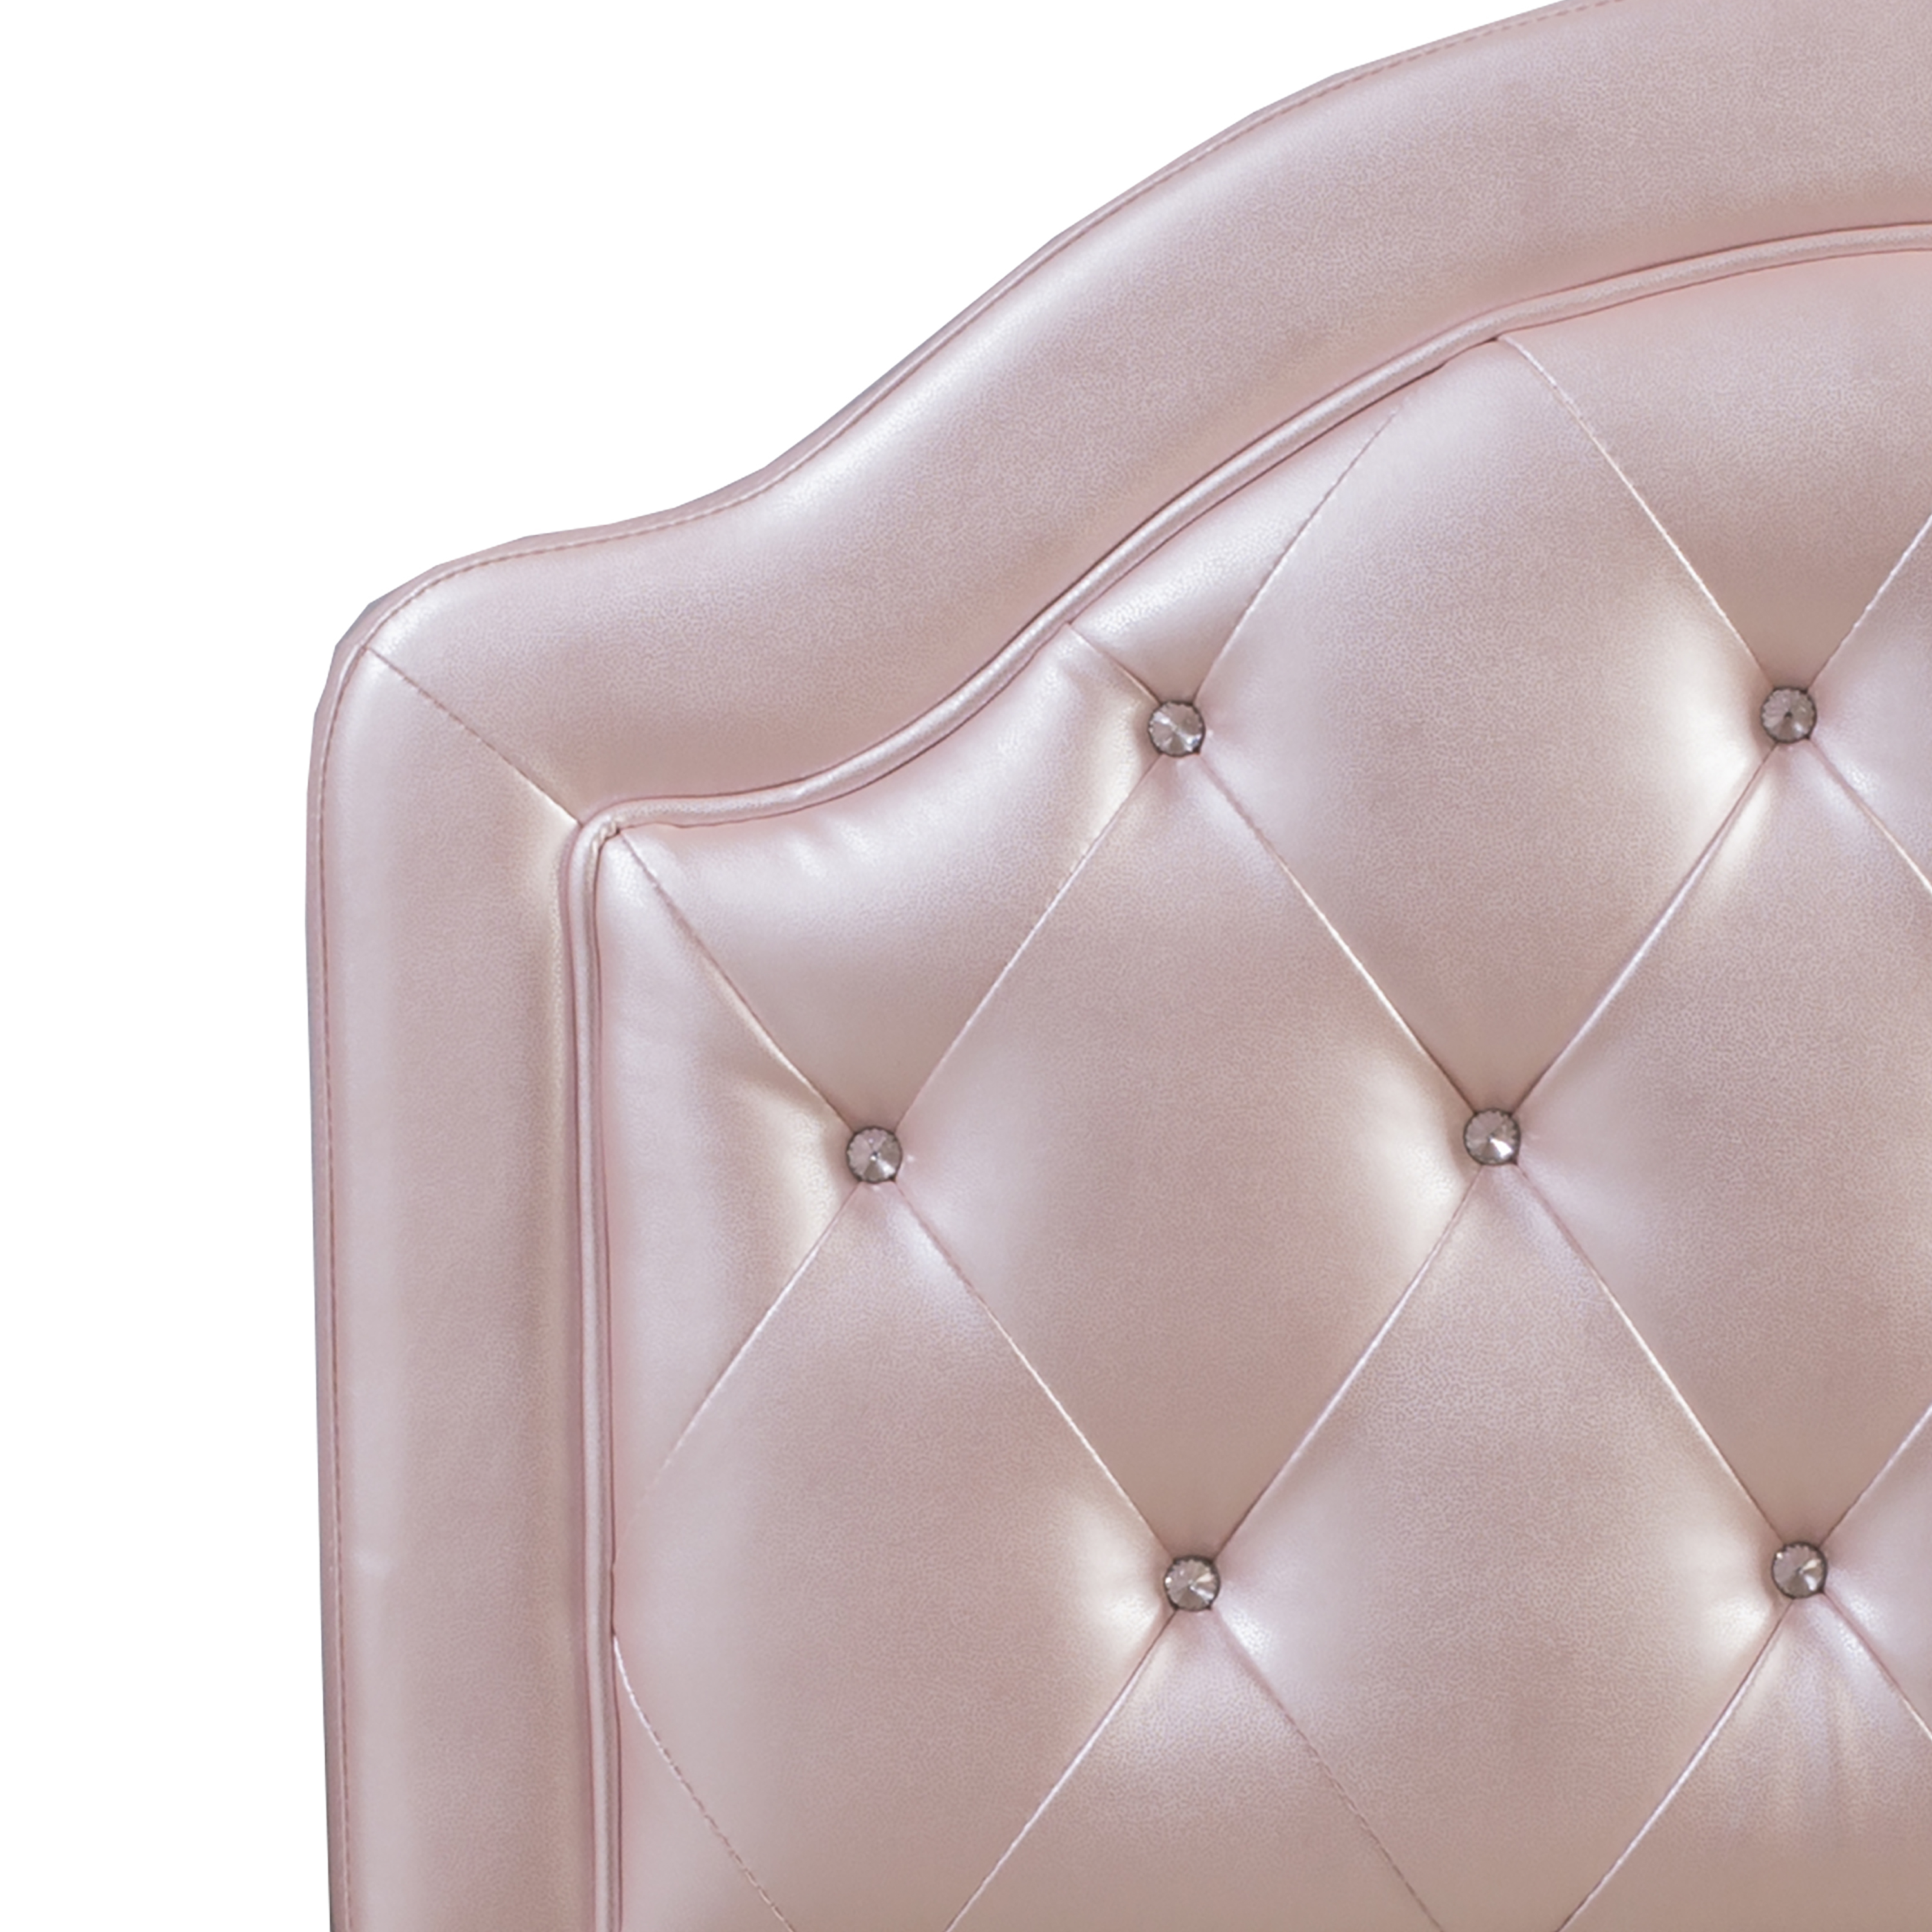 Hillsdale Furniture Karley Tufted Faux Leather Twin Headboard, Embossed Pink - image 4 of 5